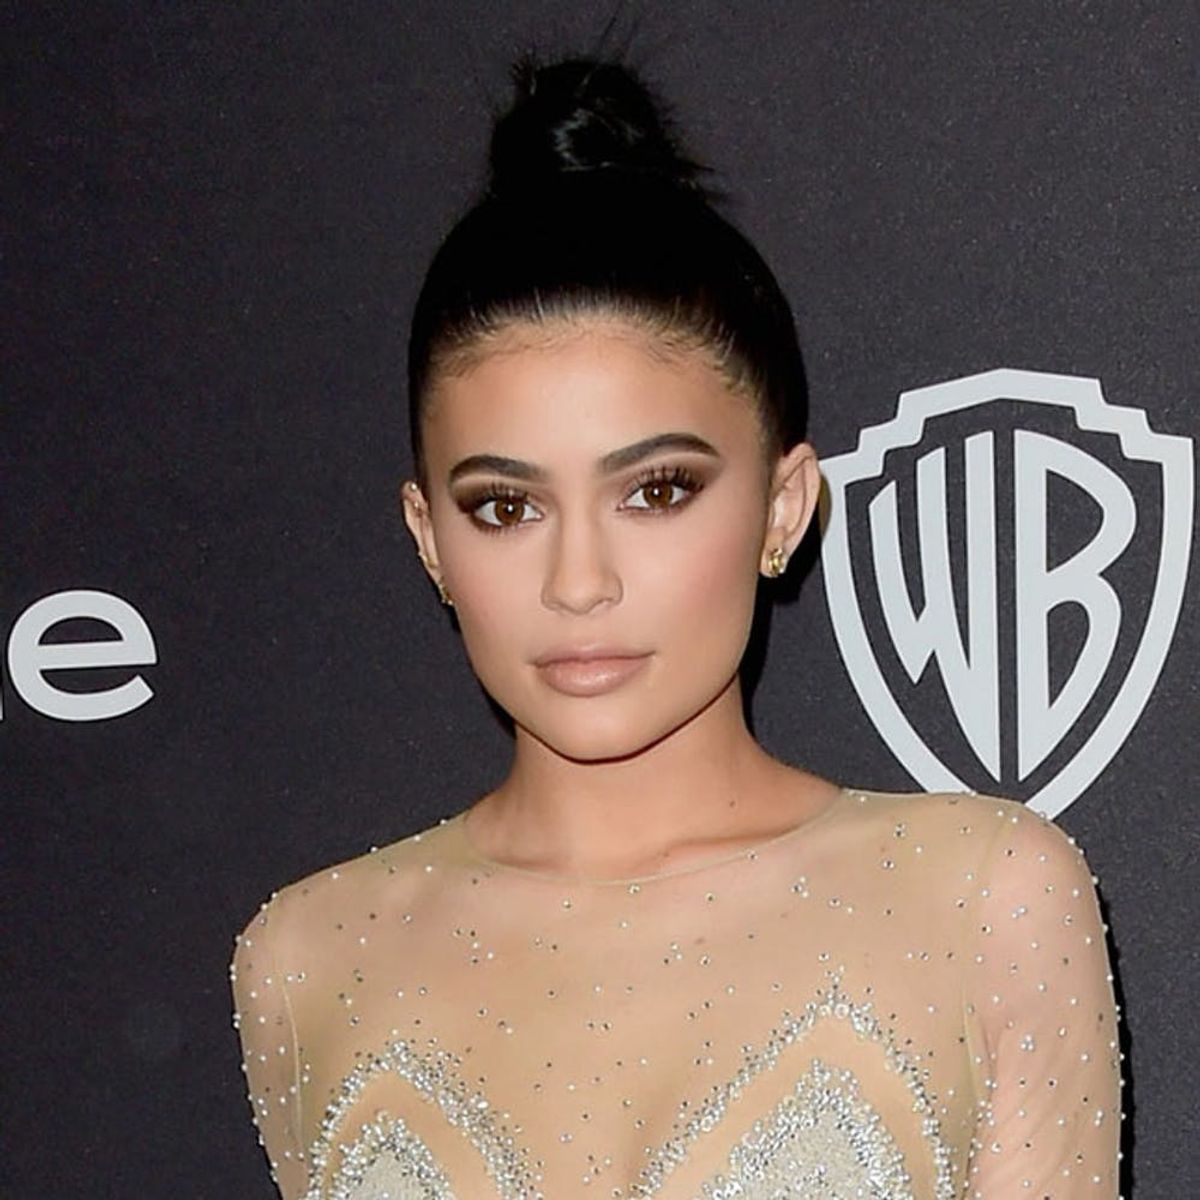 Kylie Jenner’s Latest Insta Pic Revealed More Than Just Her Valentine’s Day Lingerie